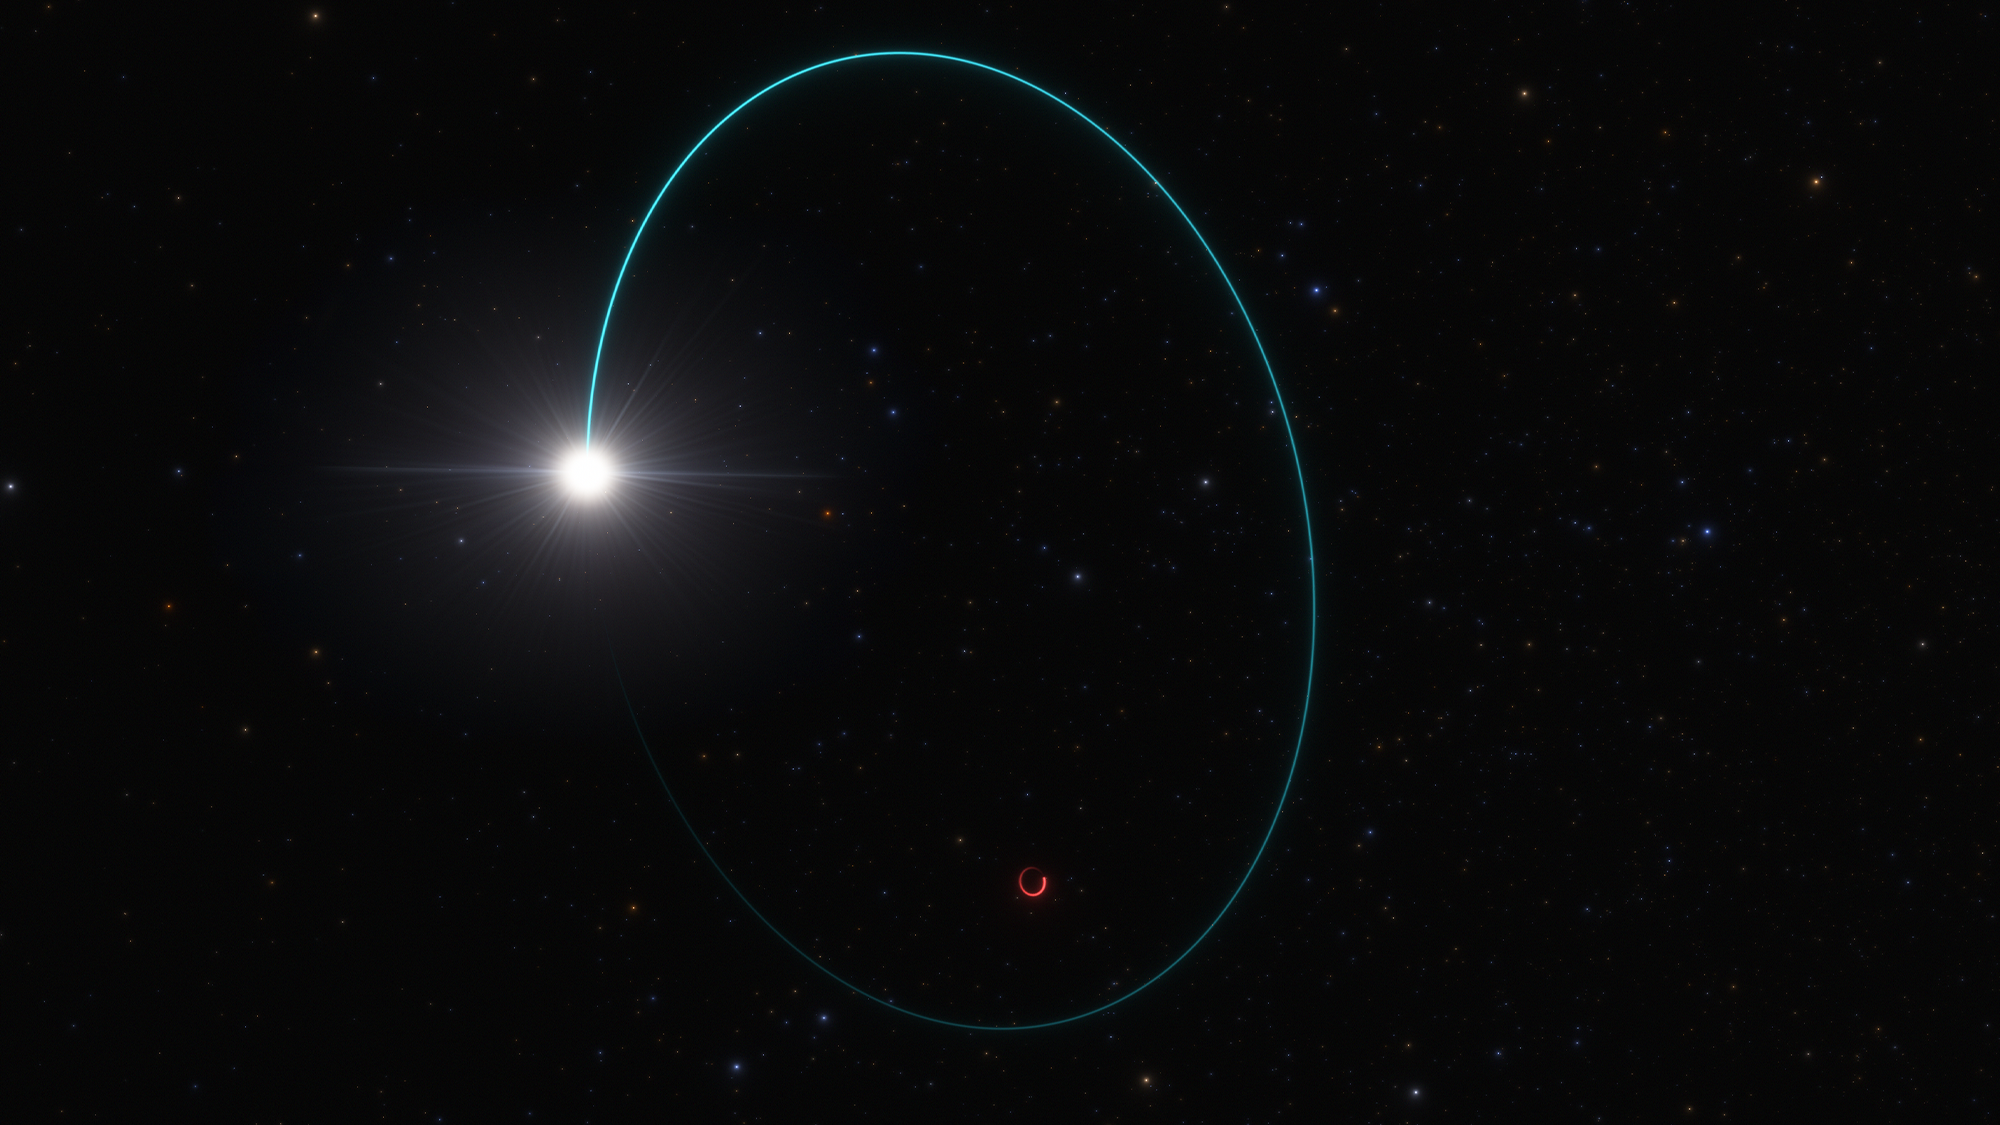 an illustration of a black hole with a companion star. the star is bright with a blue line indicating where the black hole is.